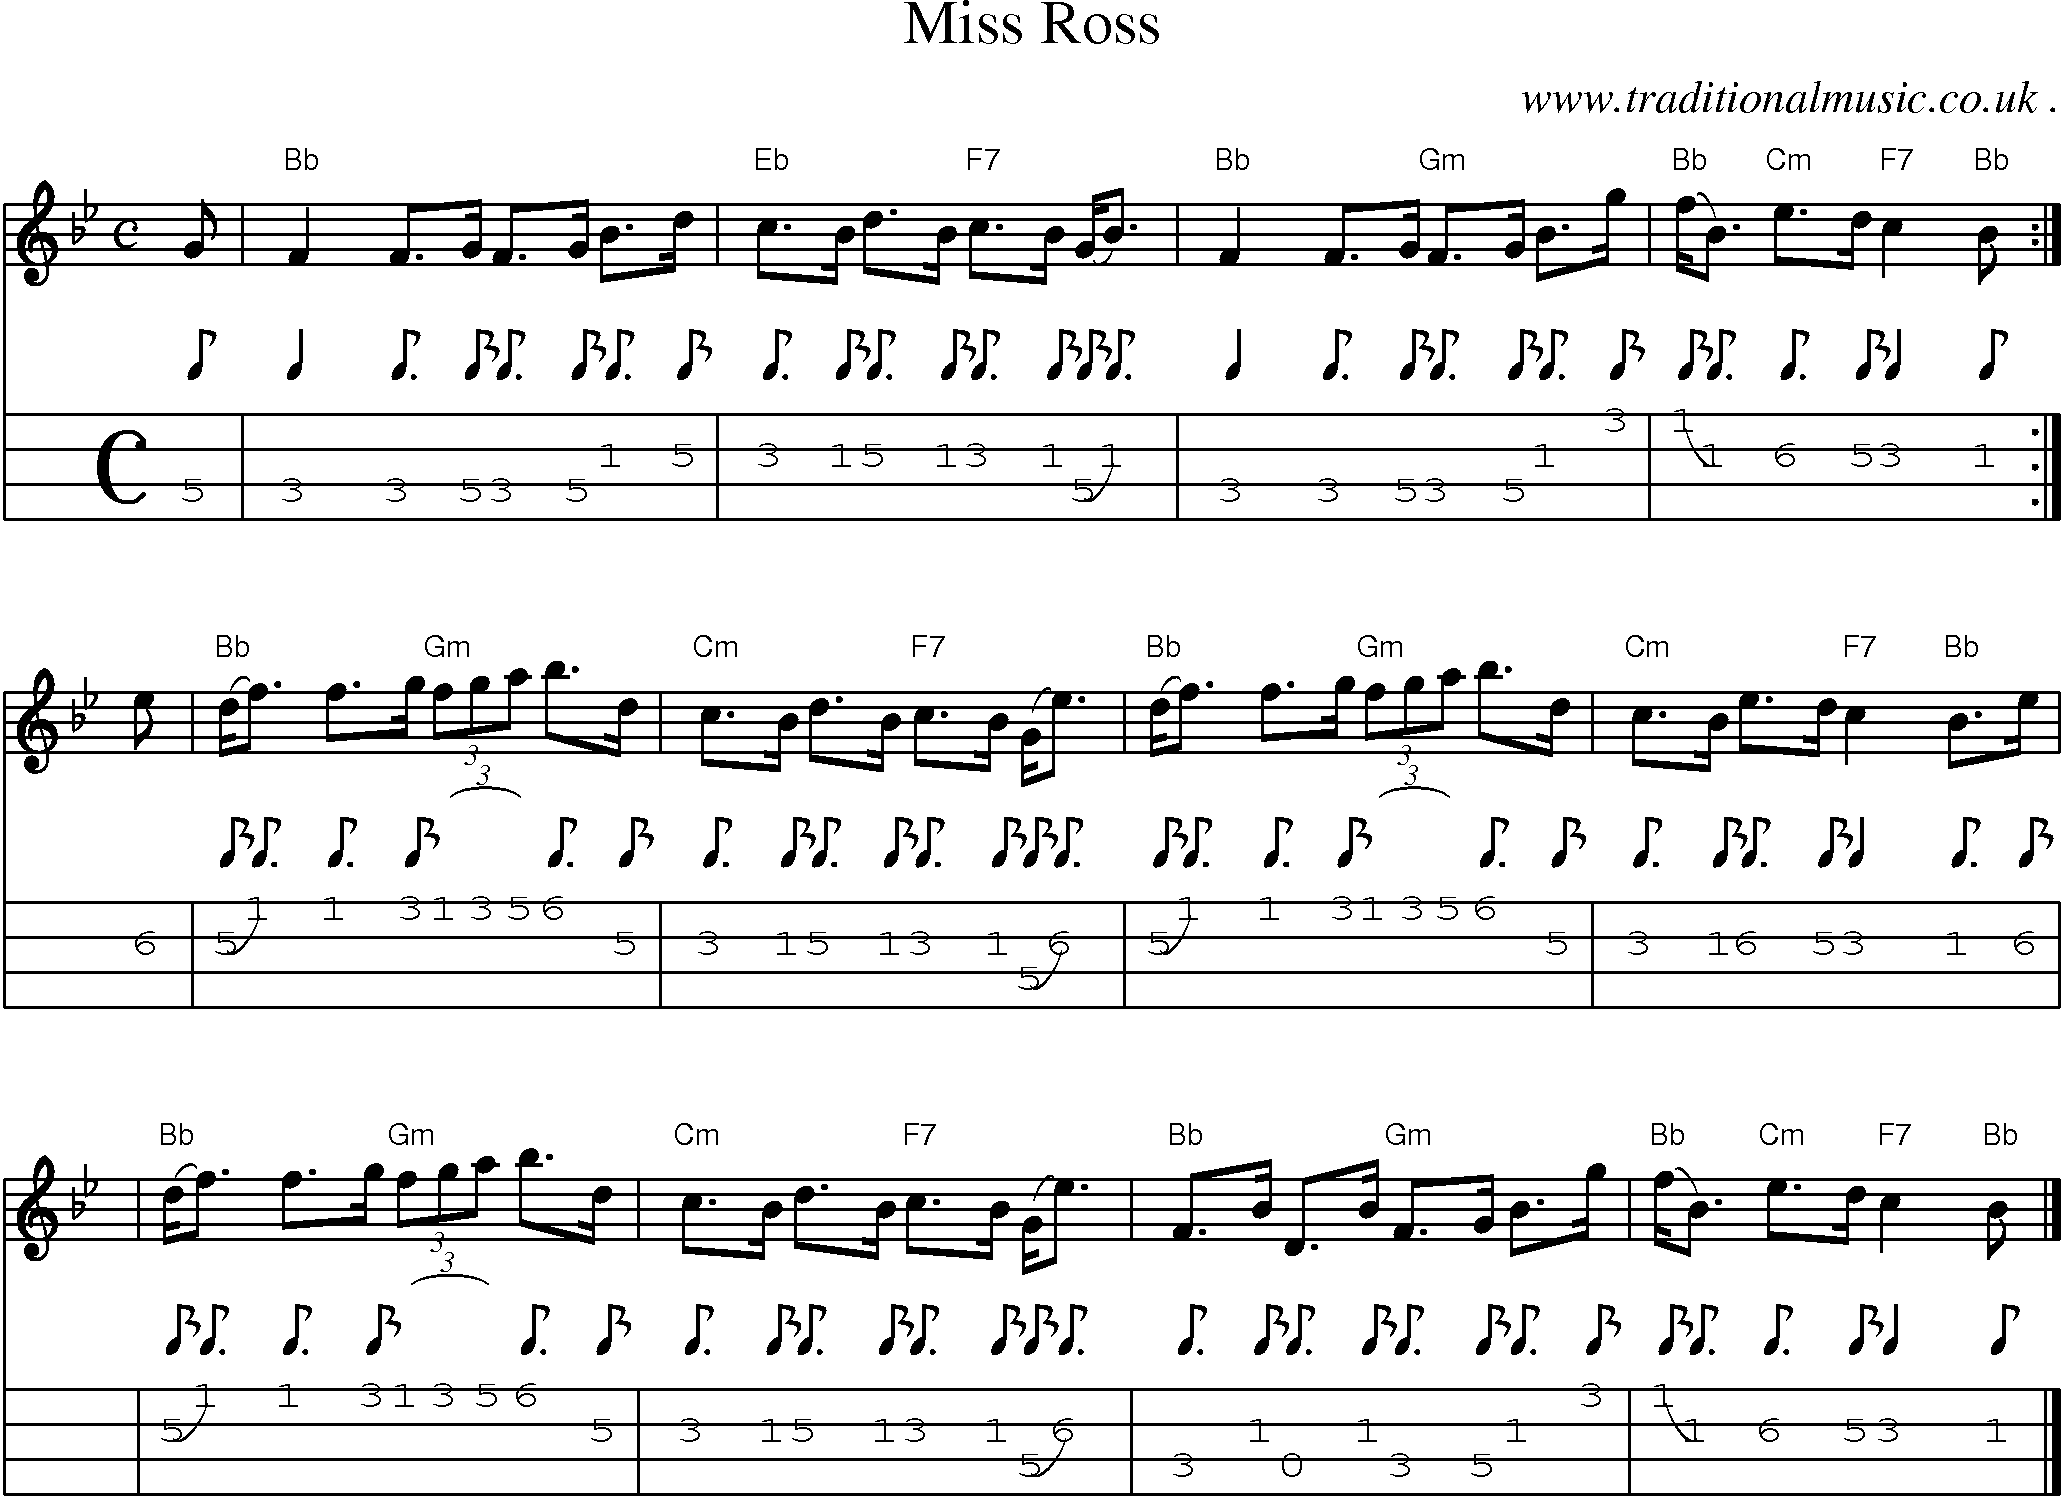 Sheet-music  score, Chords and Mandolin Tabs for Miss Ross